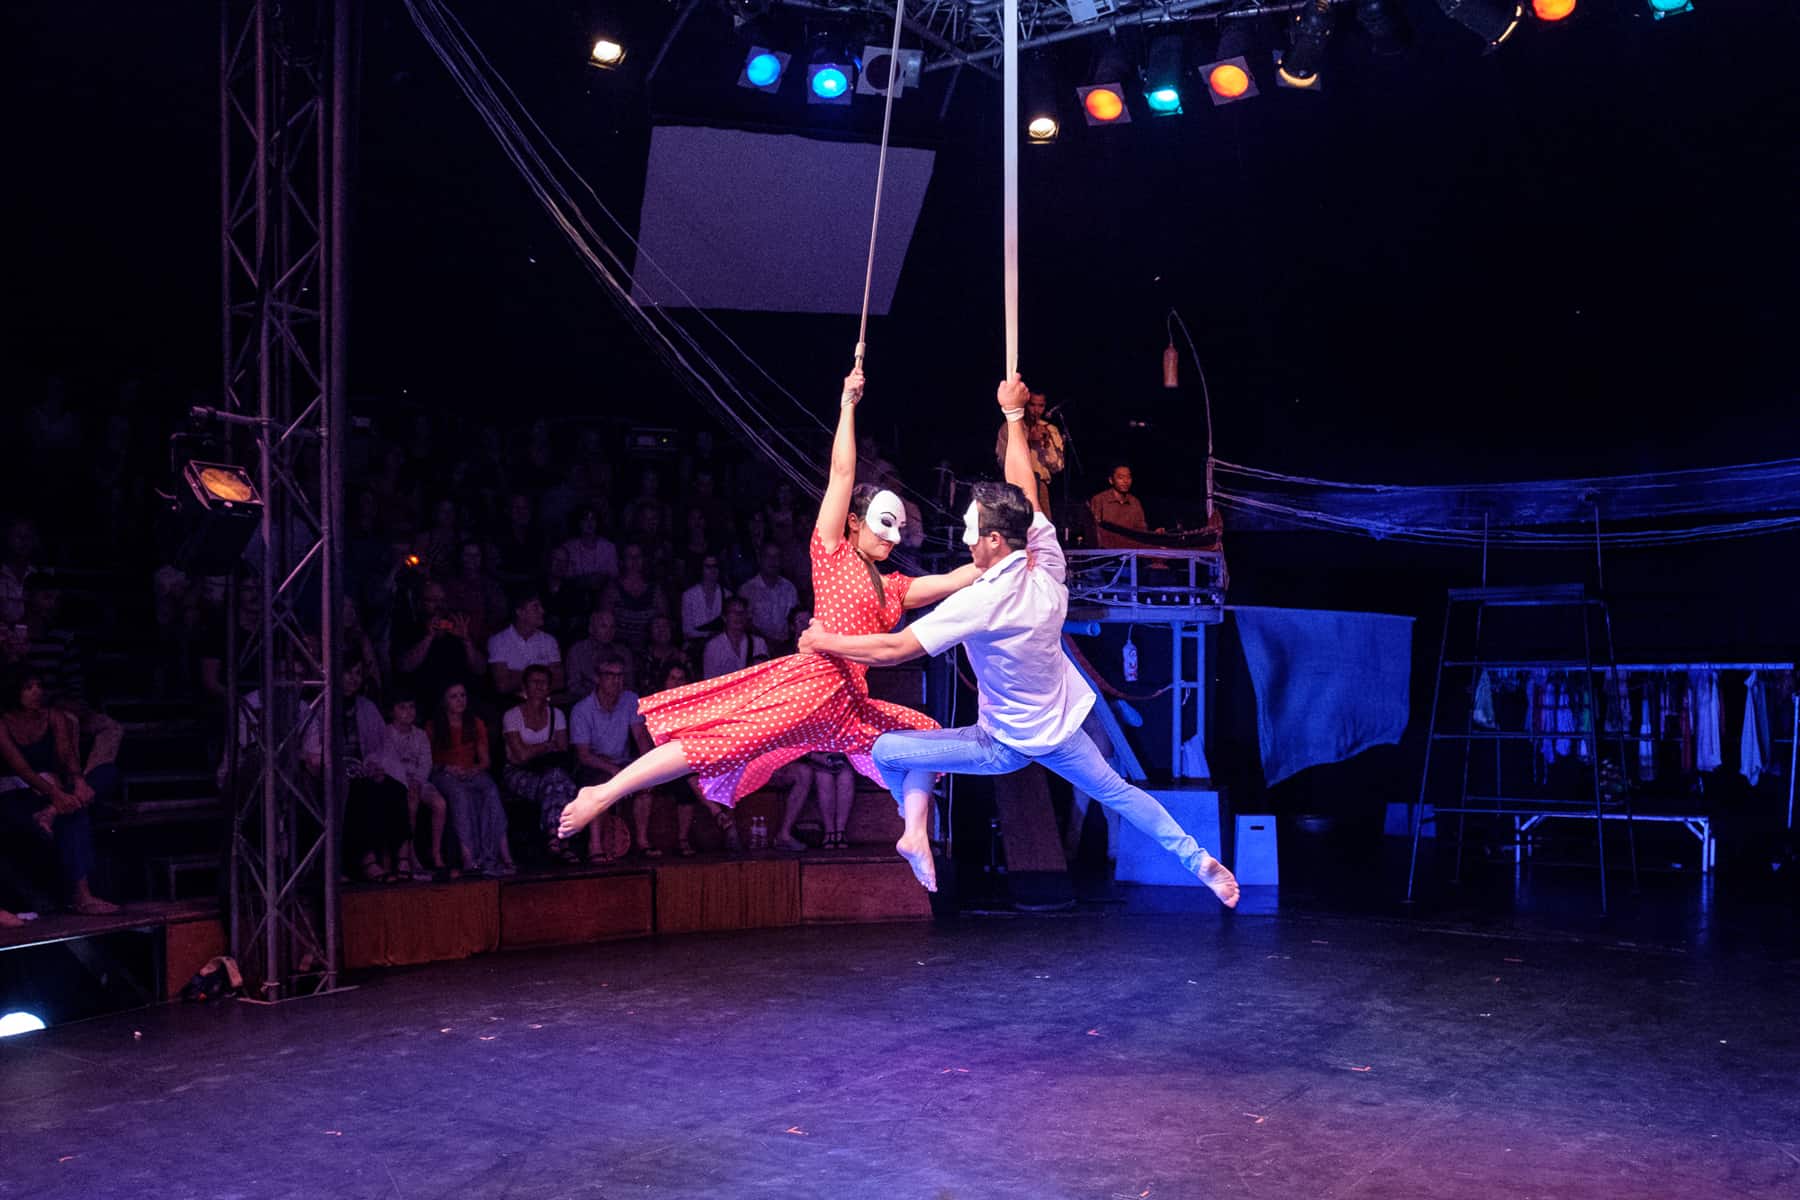 A man and woman perform a dance mid-air hanging off a suspended rope.